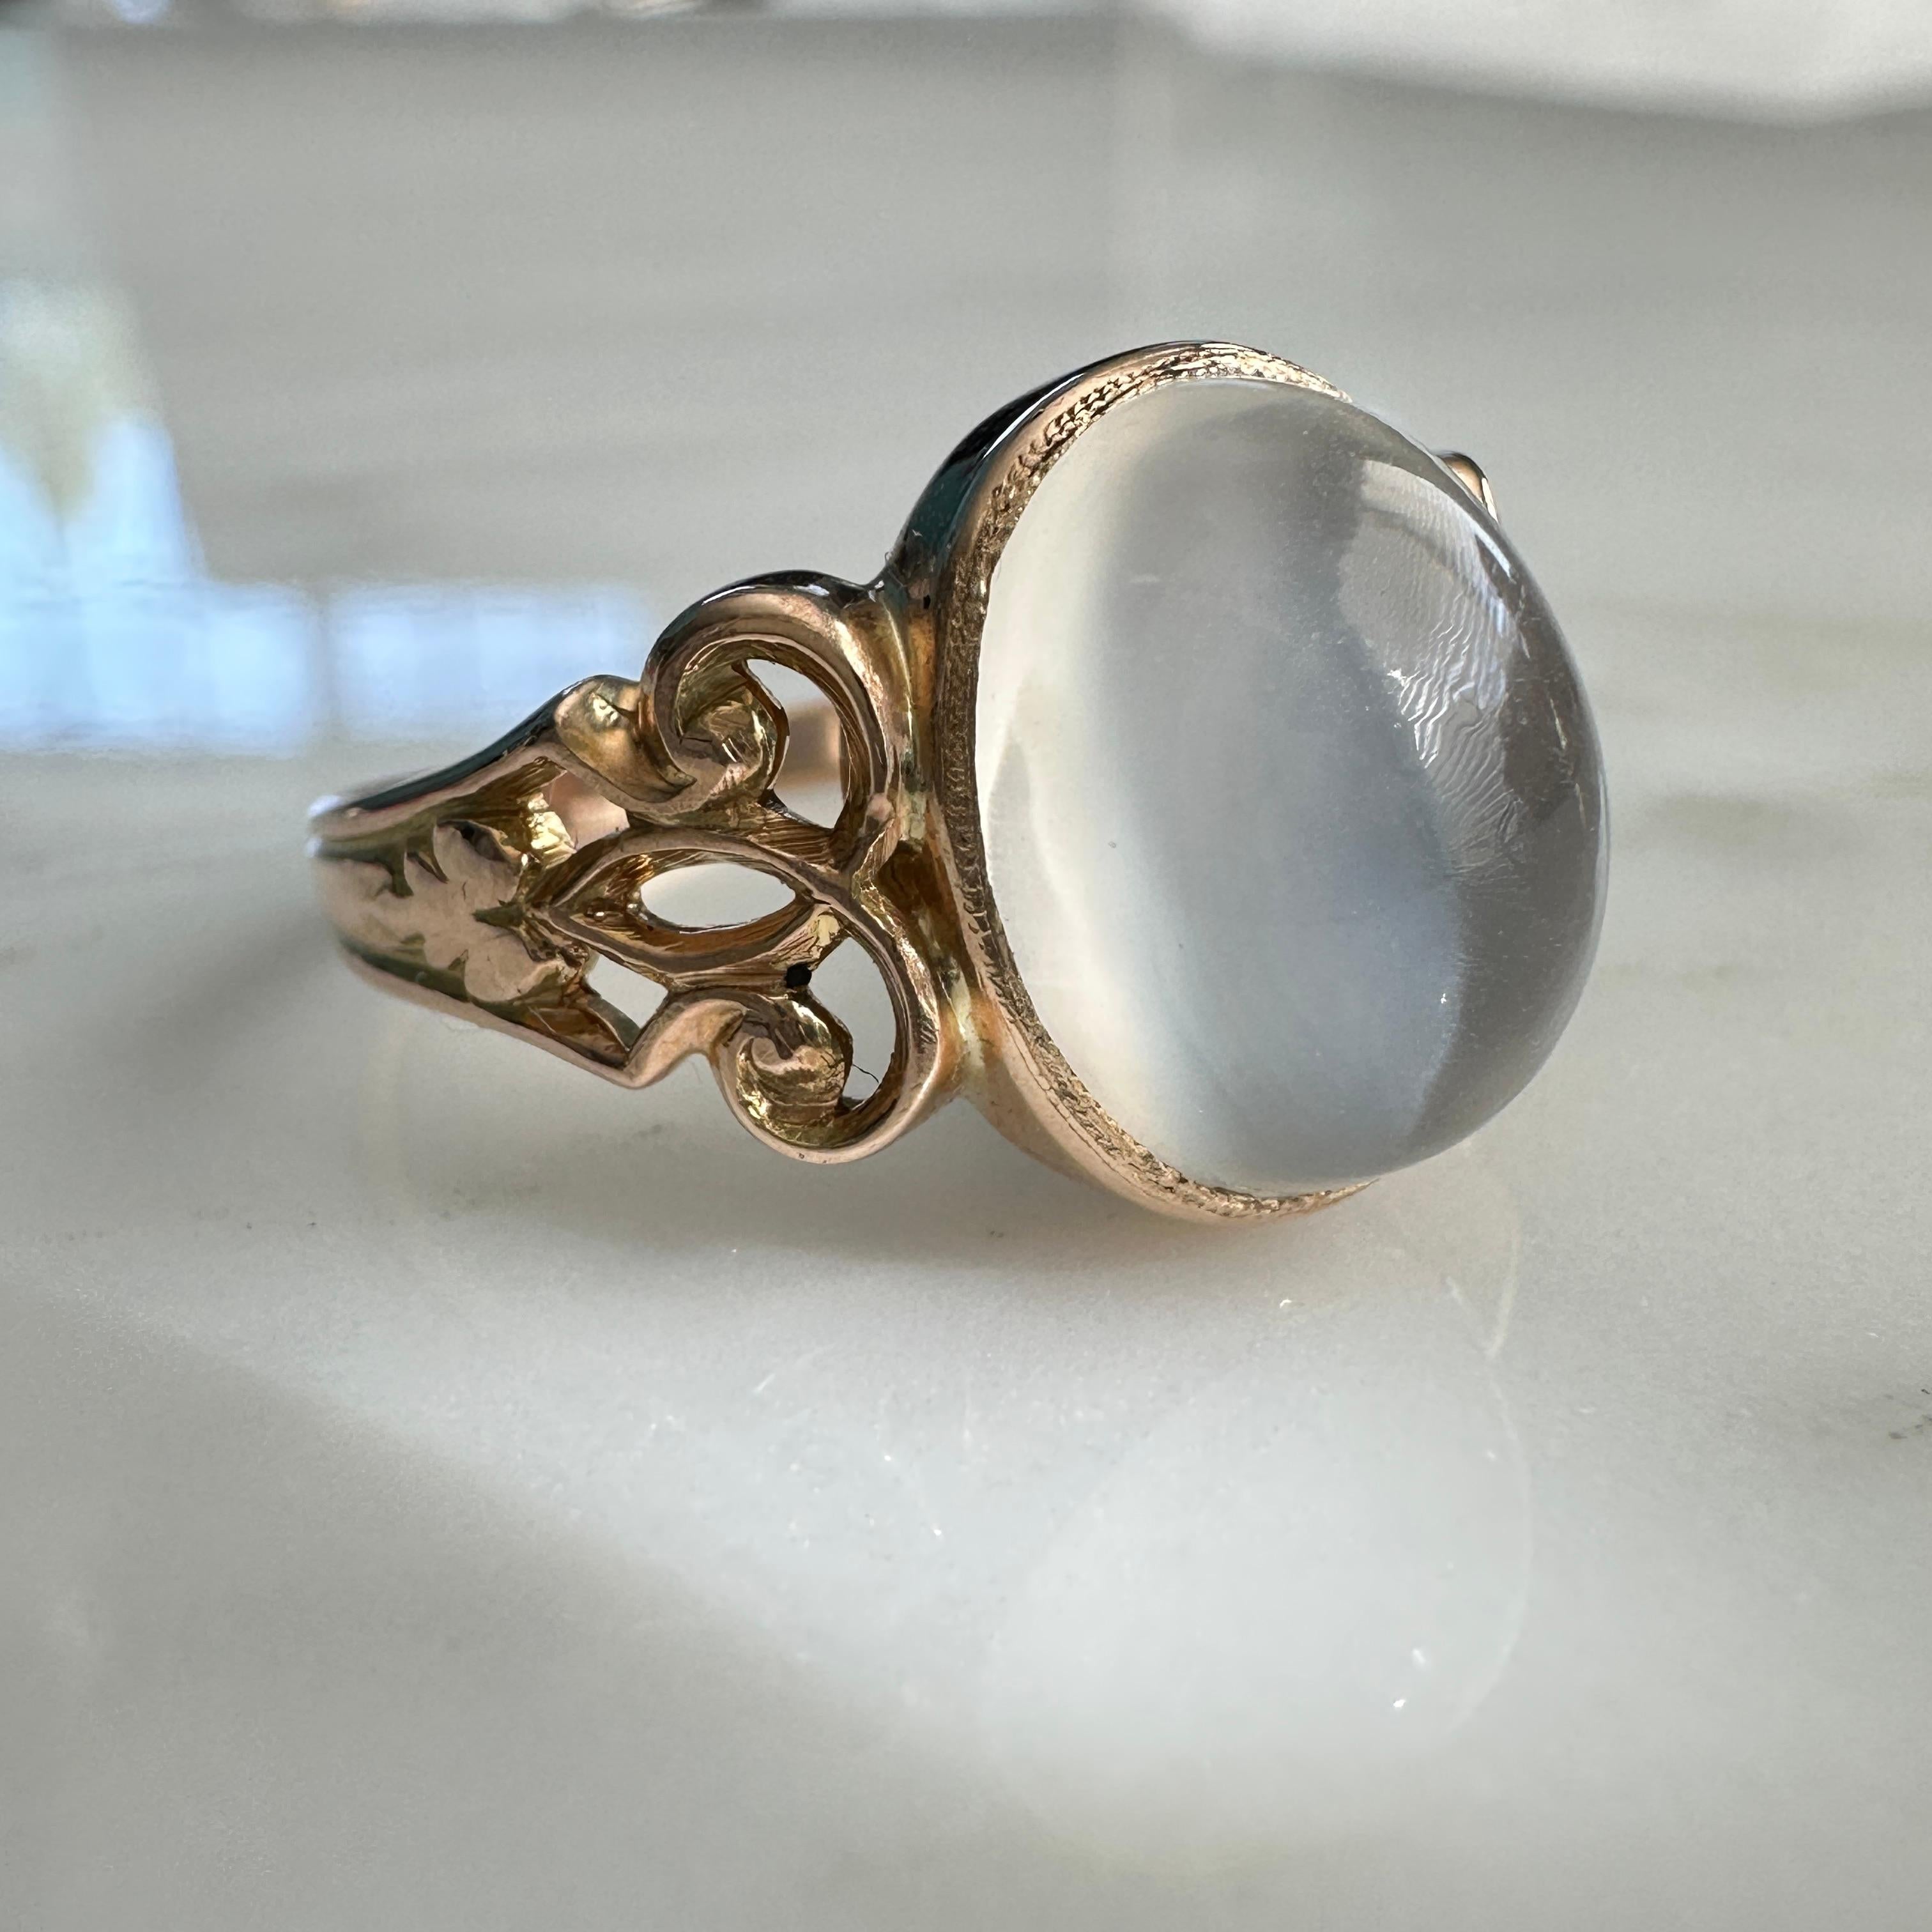 Details:
Fabulous vintage Cat's Eye Moonstone ring set in 14K yellow gold. The ring is 14K yellow gold, and has a lovely fleur-de-lis pattern on the shoulders of the setting. The cabochon moonstone is a nice size, measures 11.9mm x 9.59mm and has a